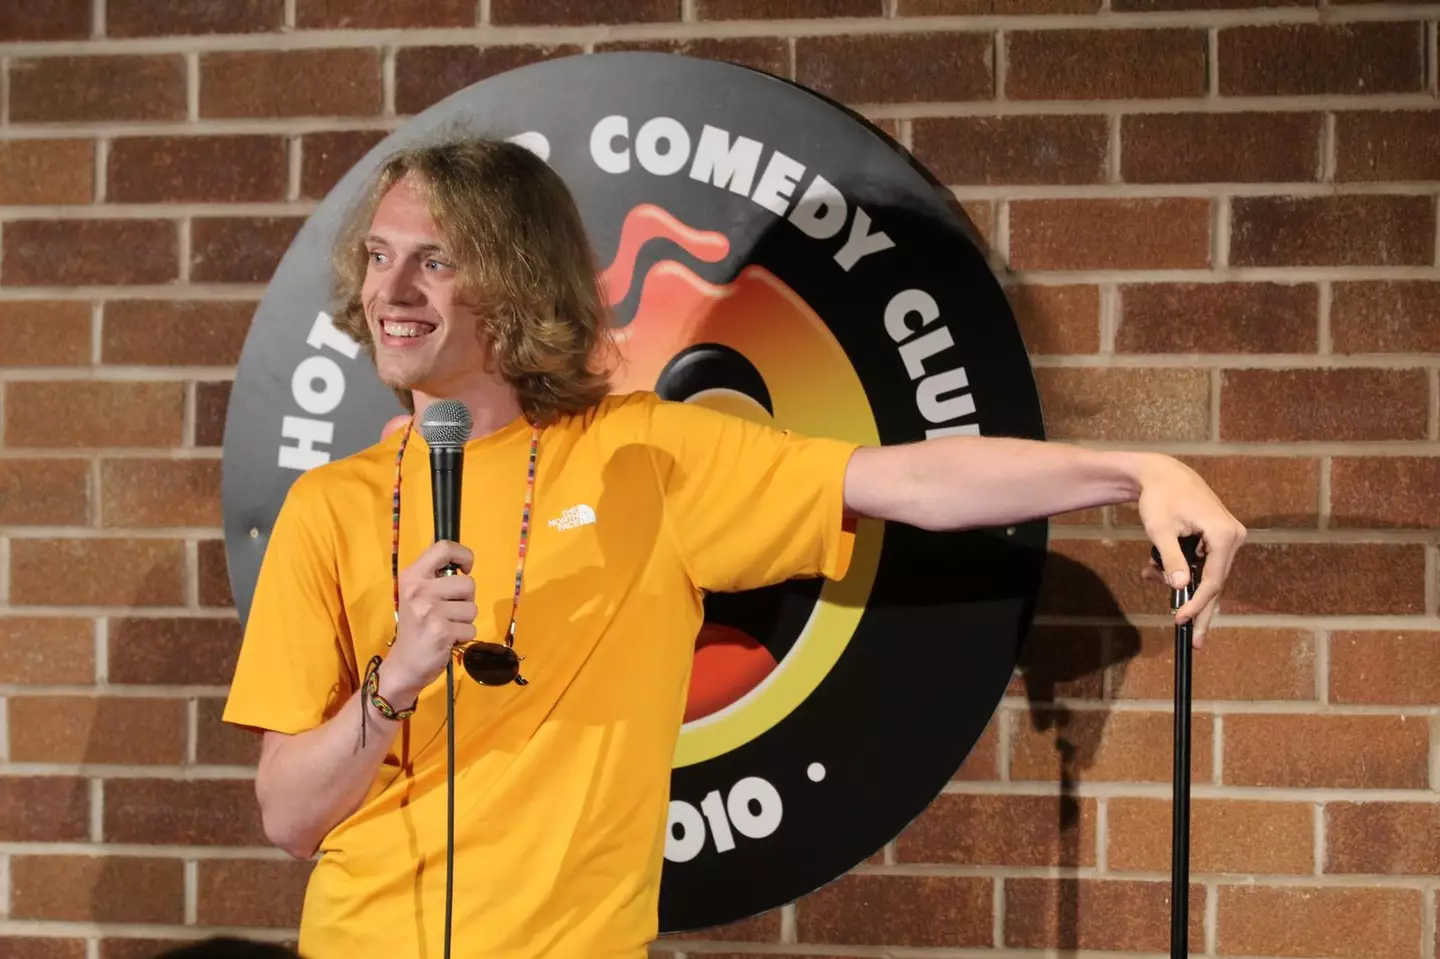 Danny has even performed at the Hot Water Comedy Club himself.